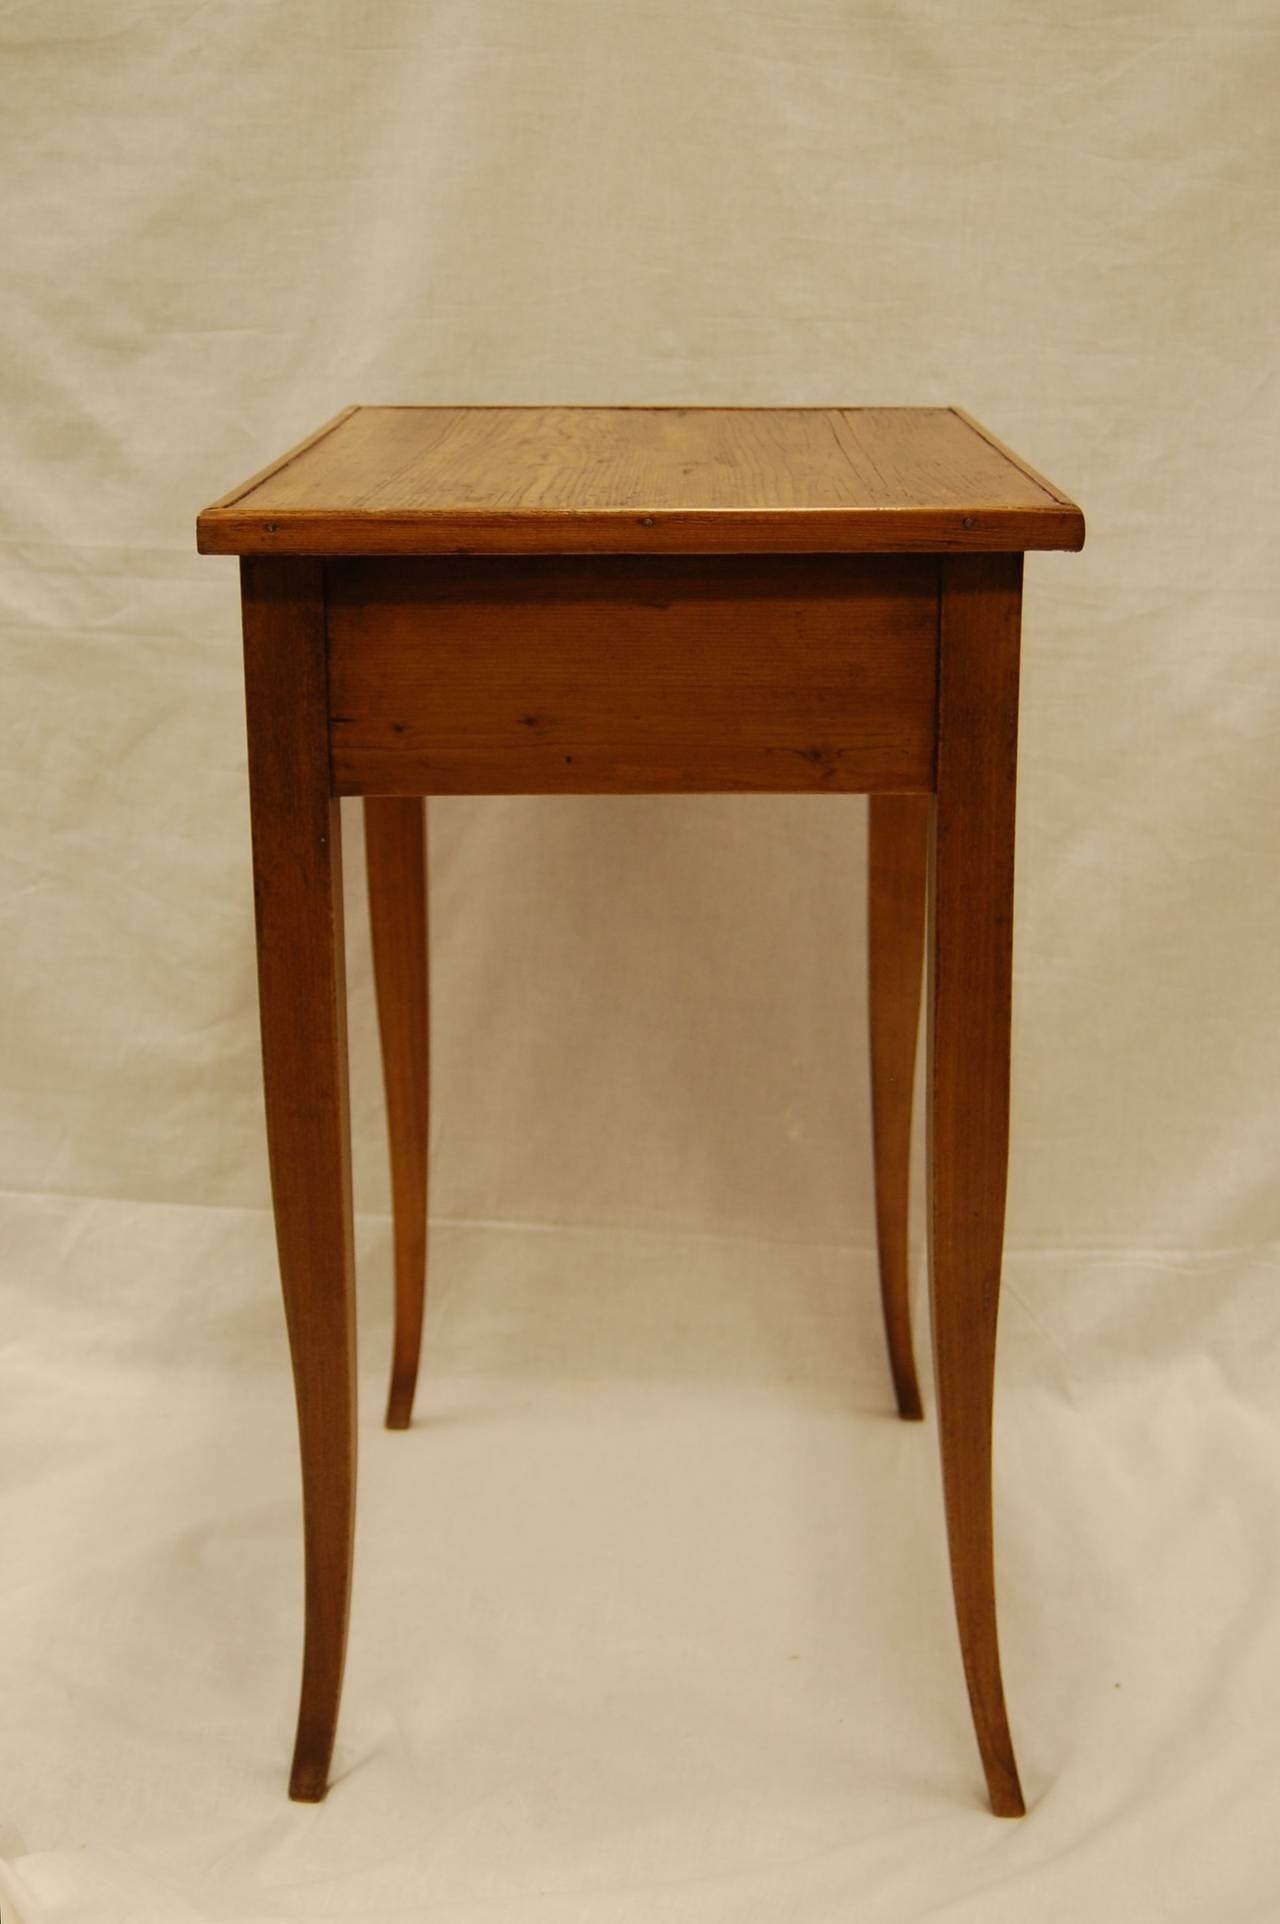 French Provincial Knotty Pine Side Table with Drawer, 19th Century